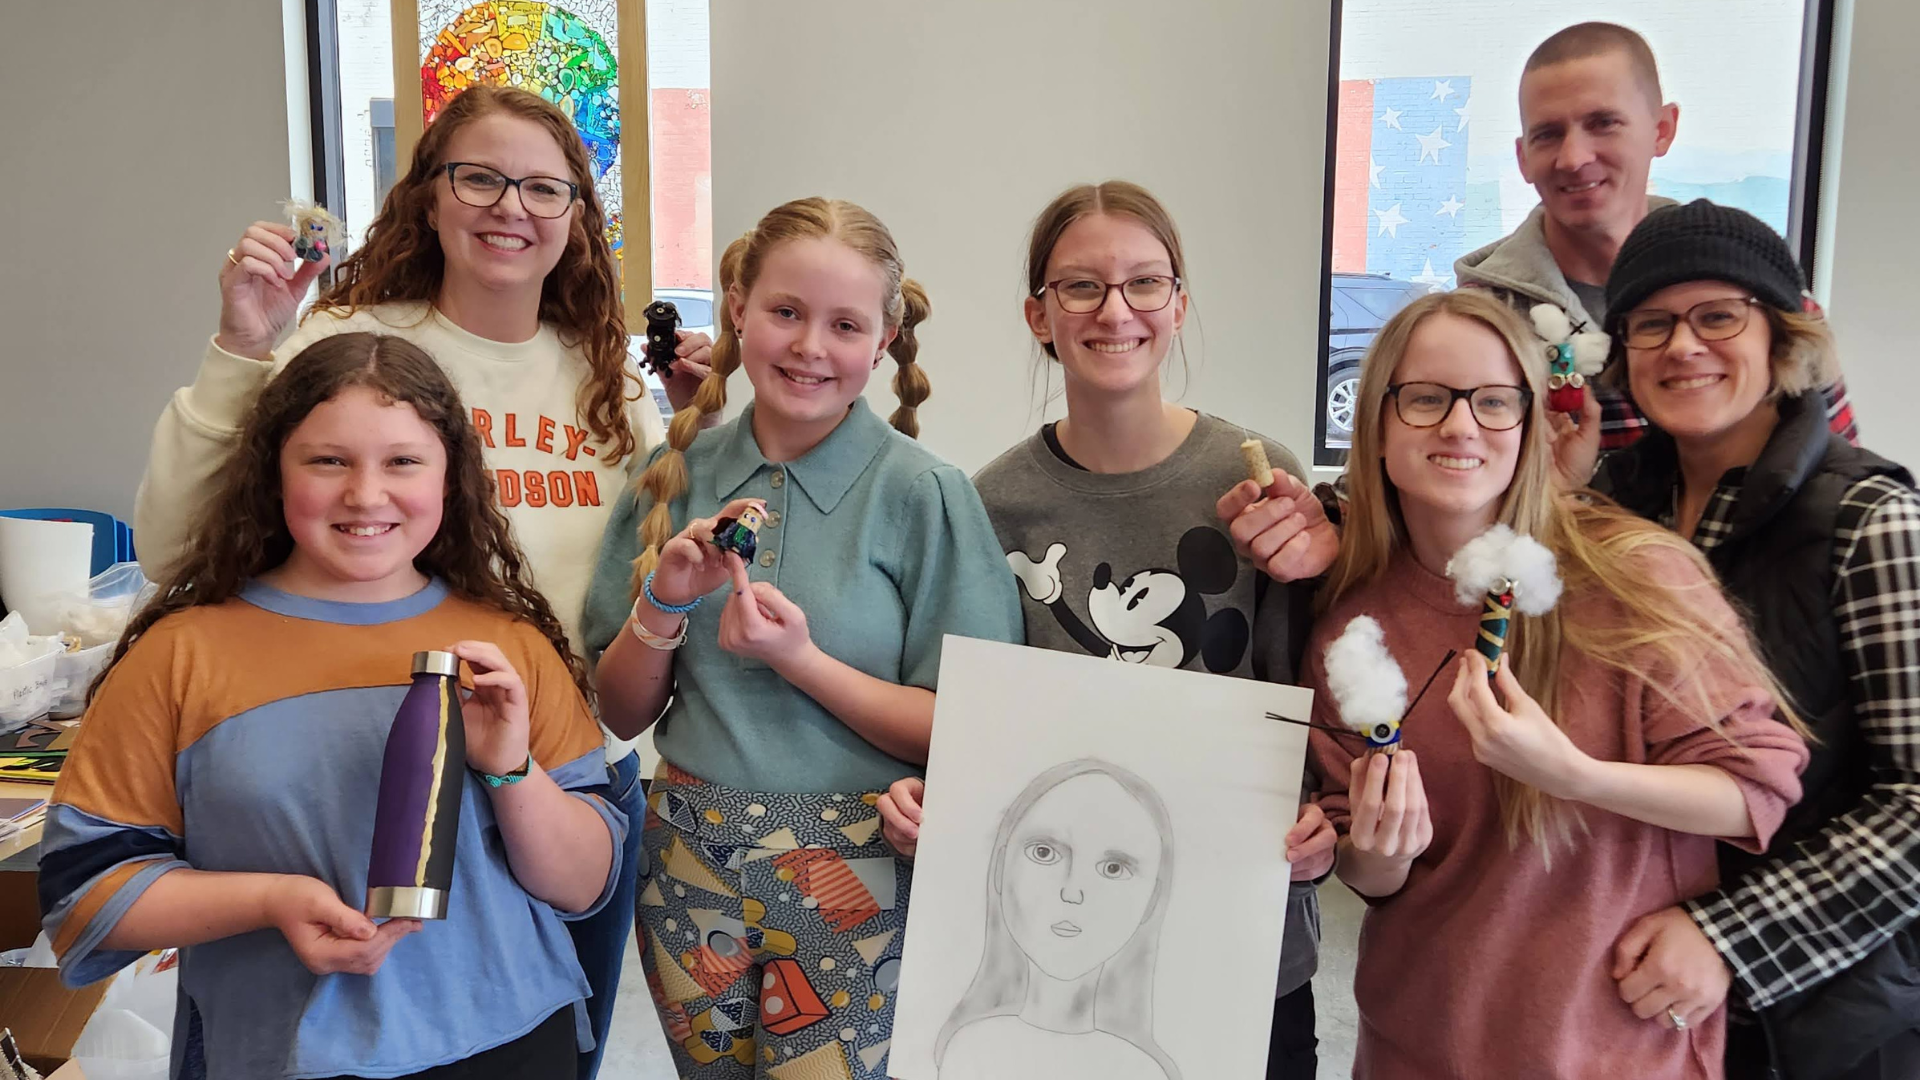 A group of middle-school aged girls with their parents smiling with various arts and crafts that they made.